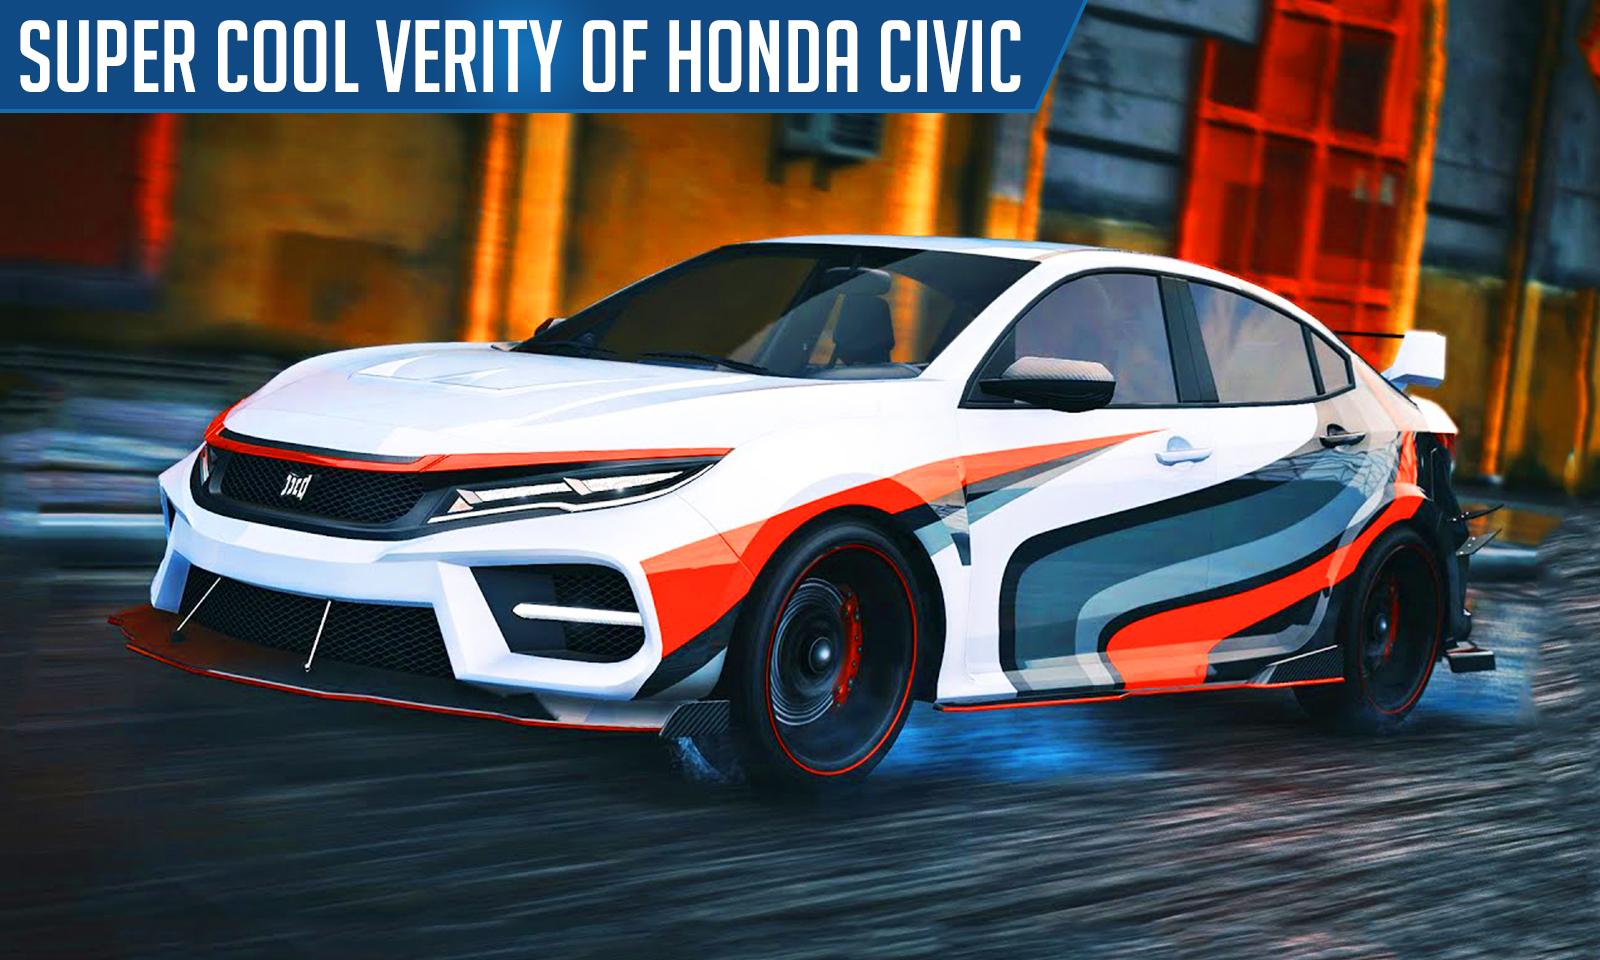 Drift & Driving-Honda Civic 2 for Android - APK Download